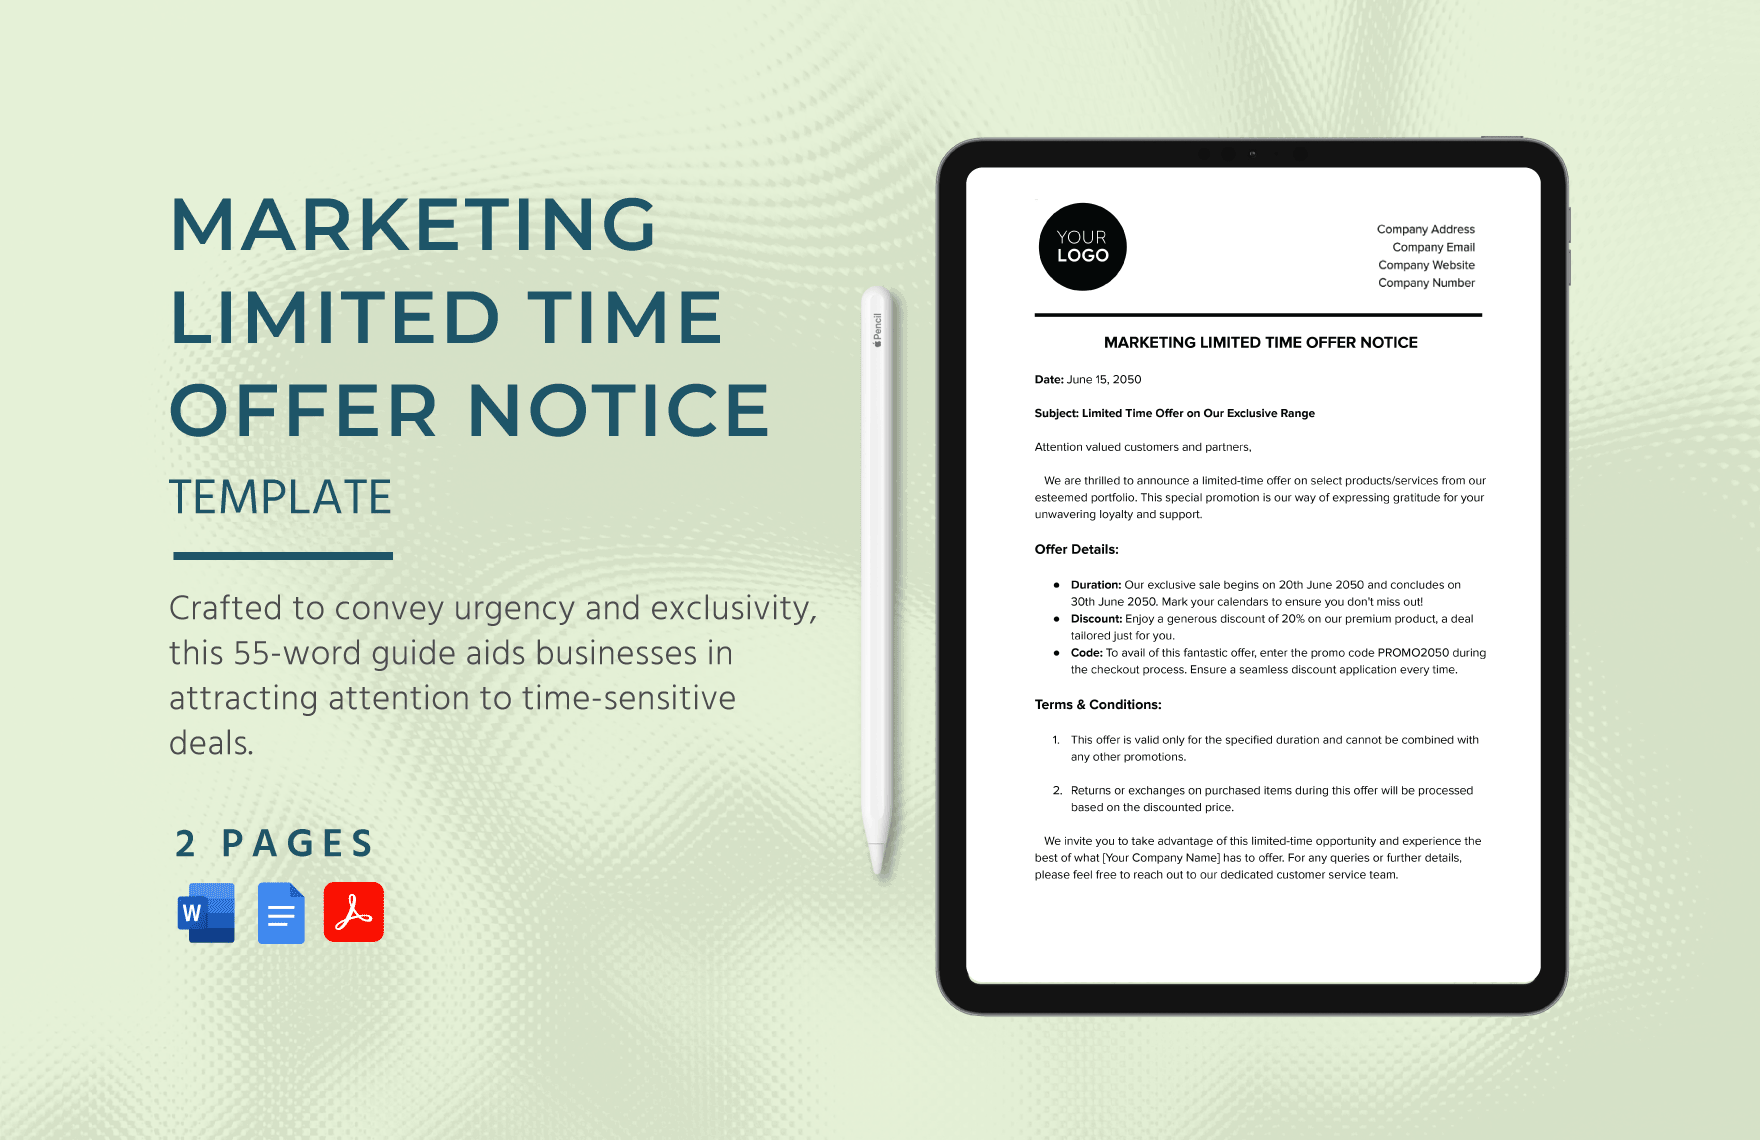 Marketing Limited Time Offer Notice Template in Word, PDF, Google